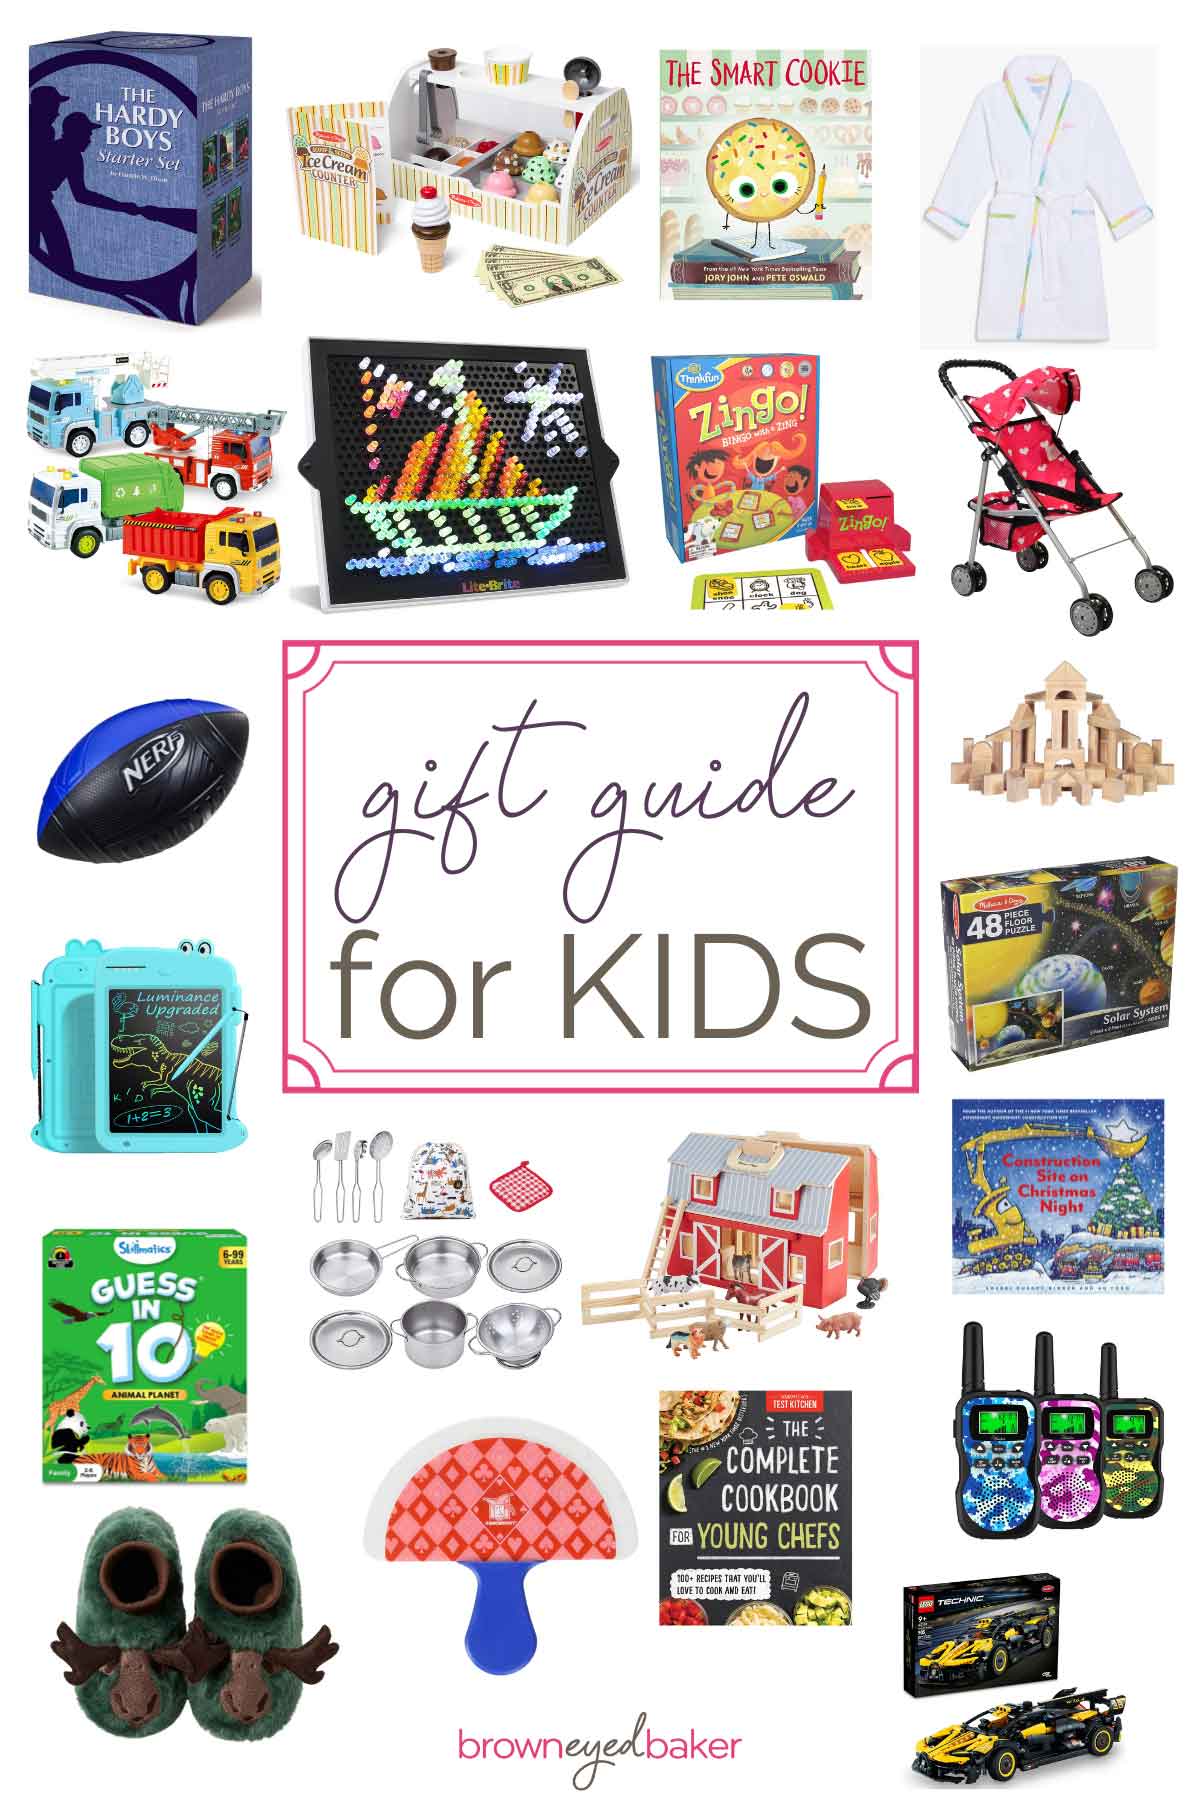 A collage of product images with a pink frame in the center and text inside "gift guide for kids".